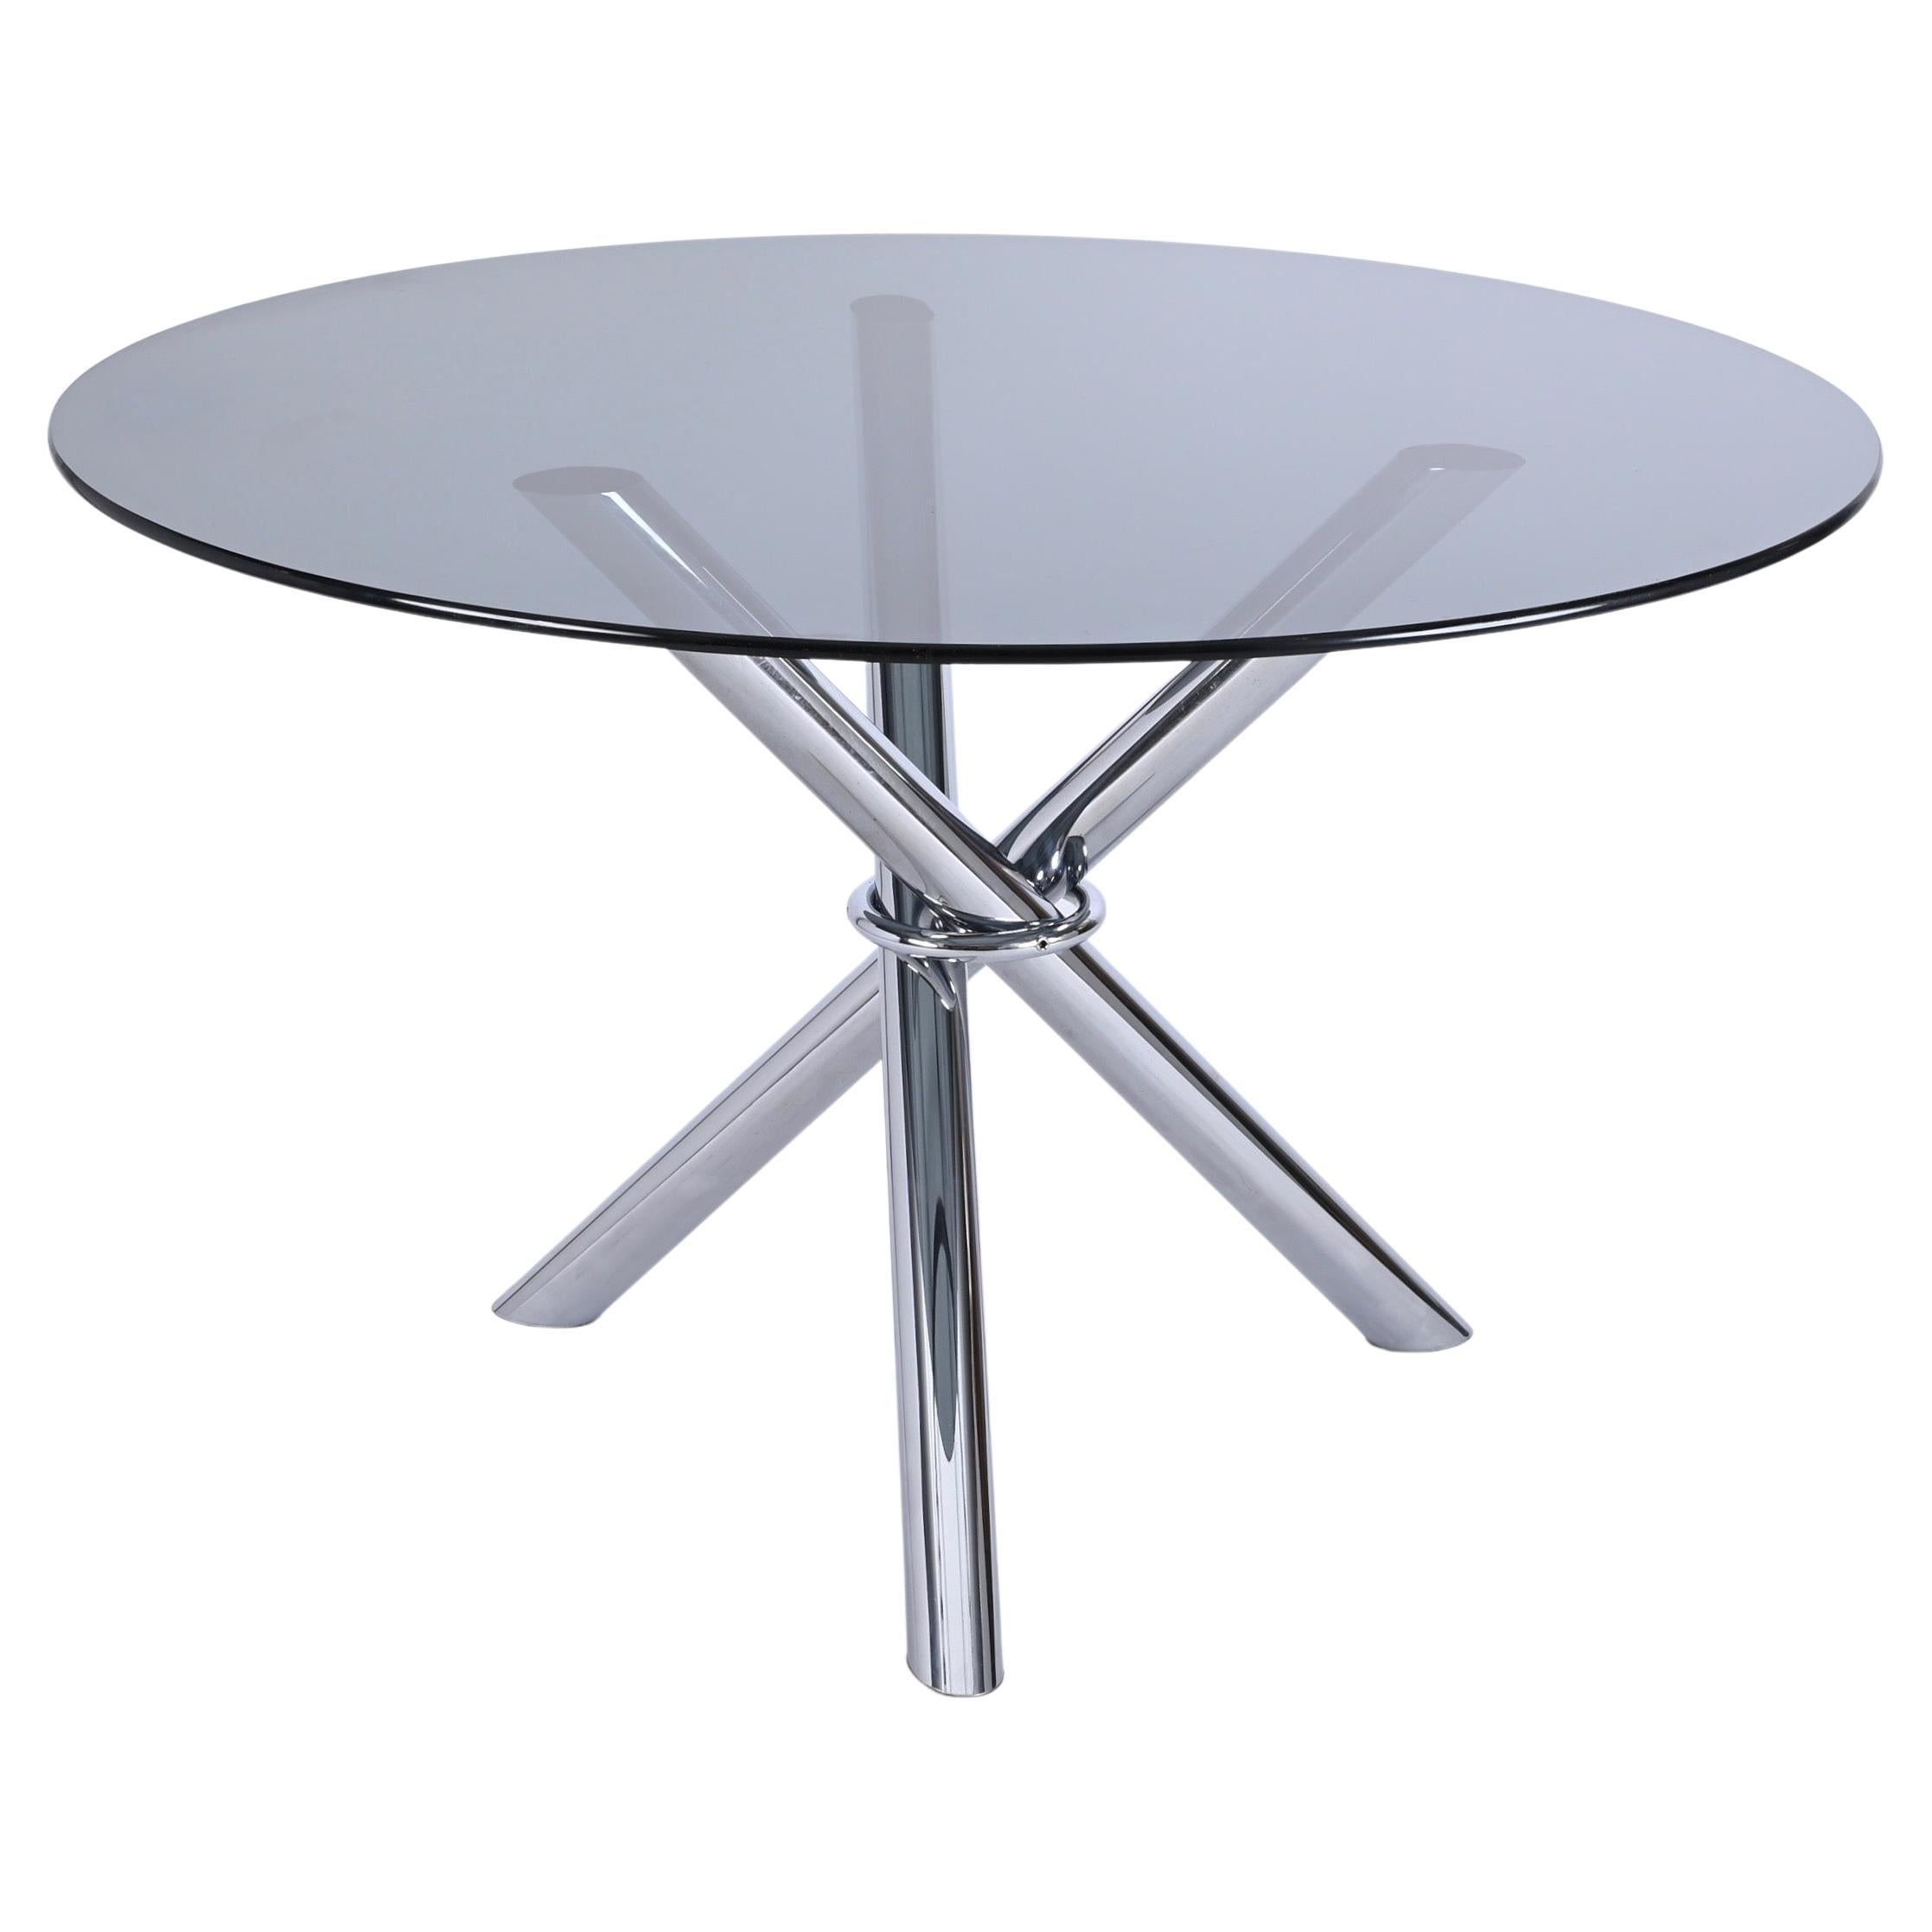 Mid-Century Dining Table, Chromed Stainless Steel with Smoked Glass, Italy 1970s